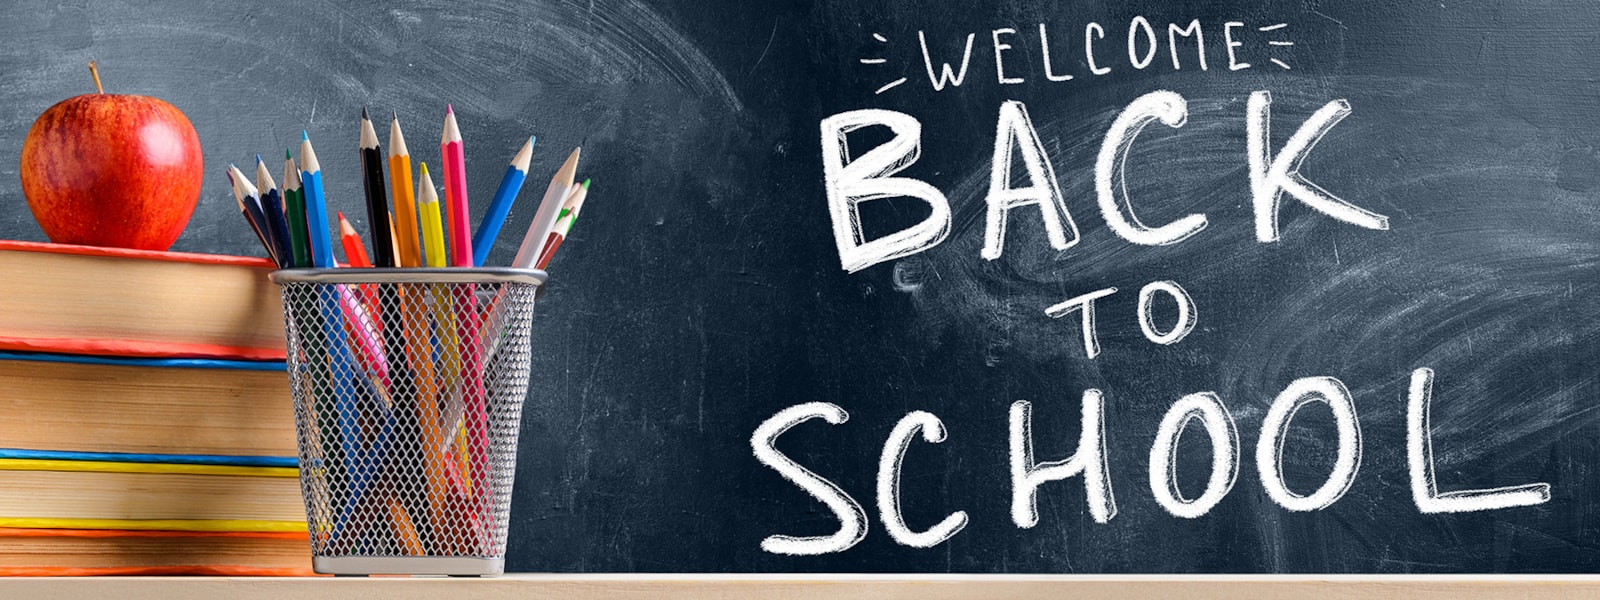 books, pencils, an apple, and a chalkboard that says welcome back to school